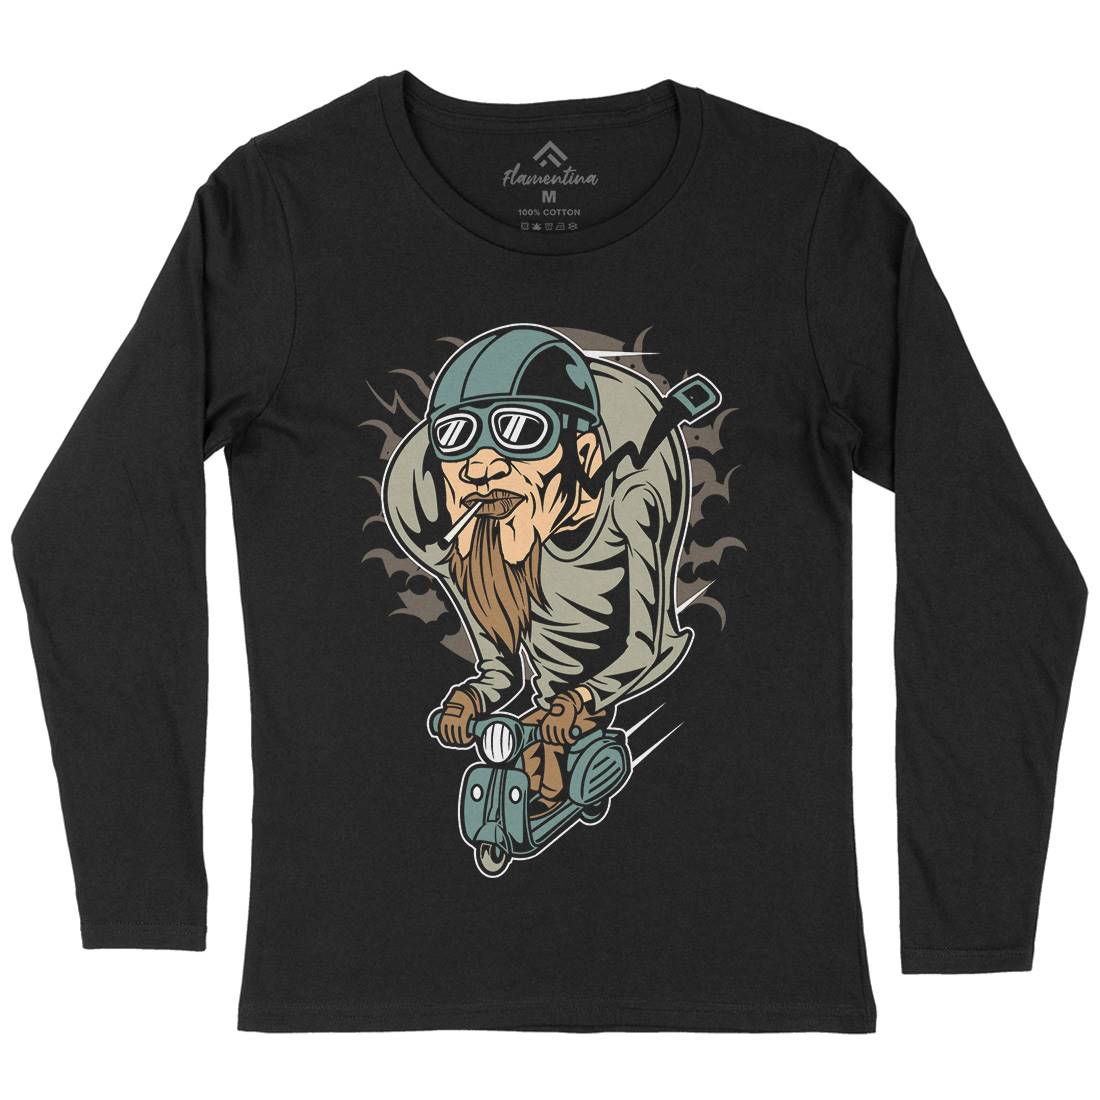 Scooter Man Womens Long Sleeve T-Shirt Motorcycles C437